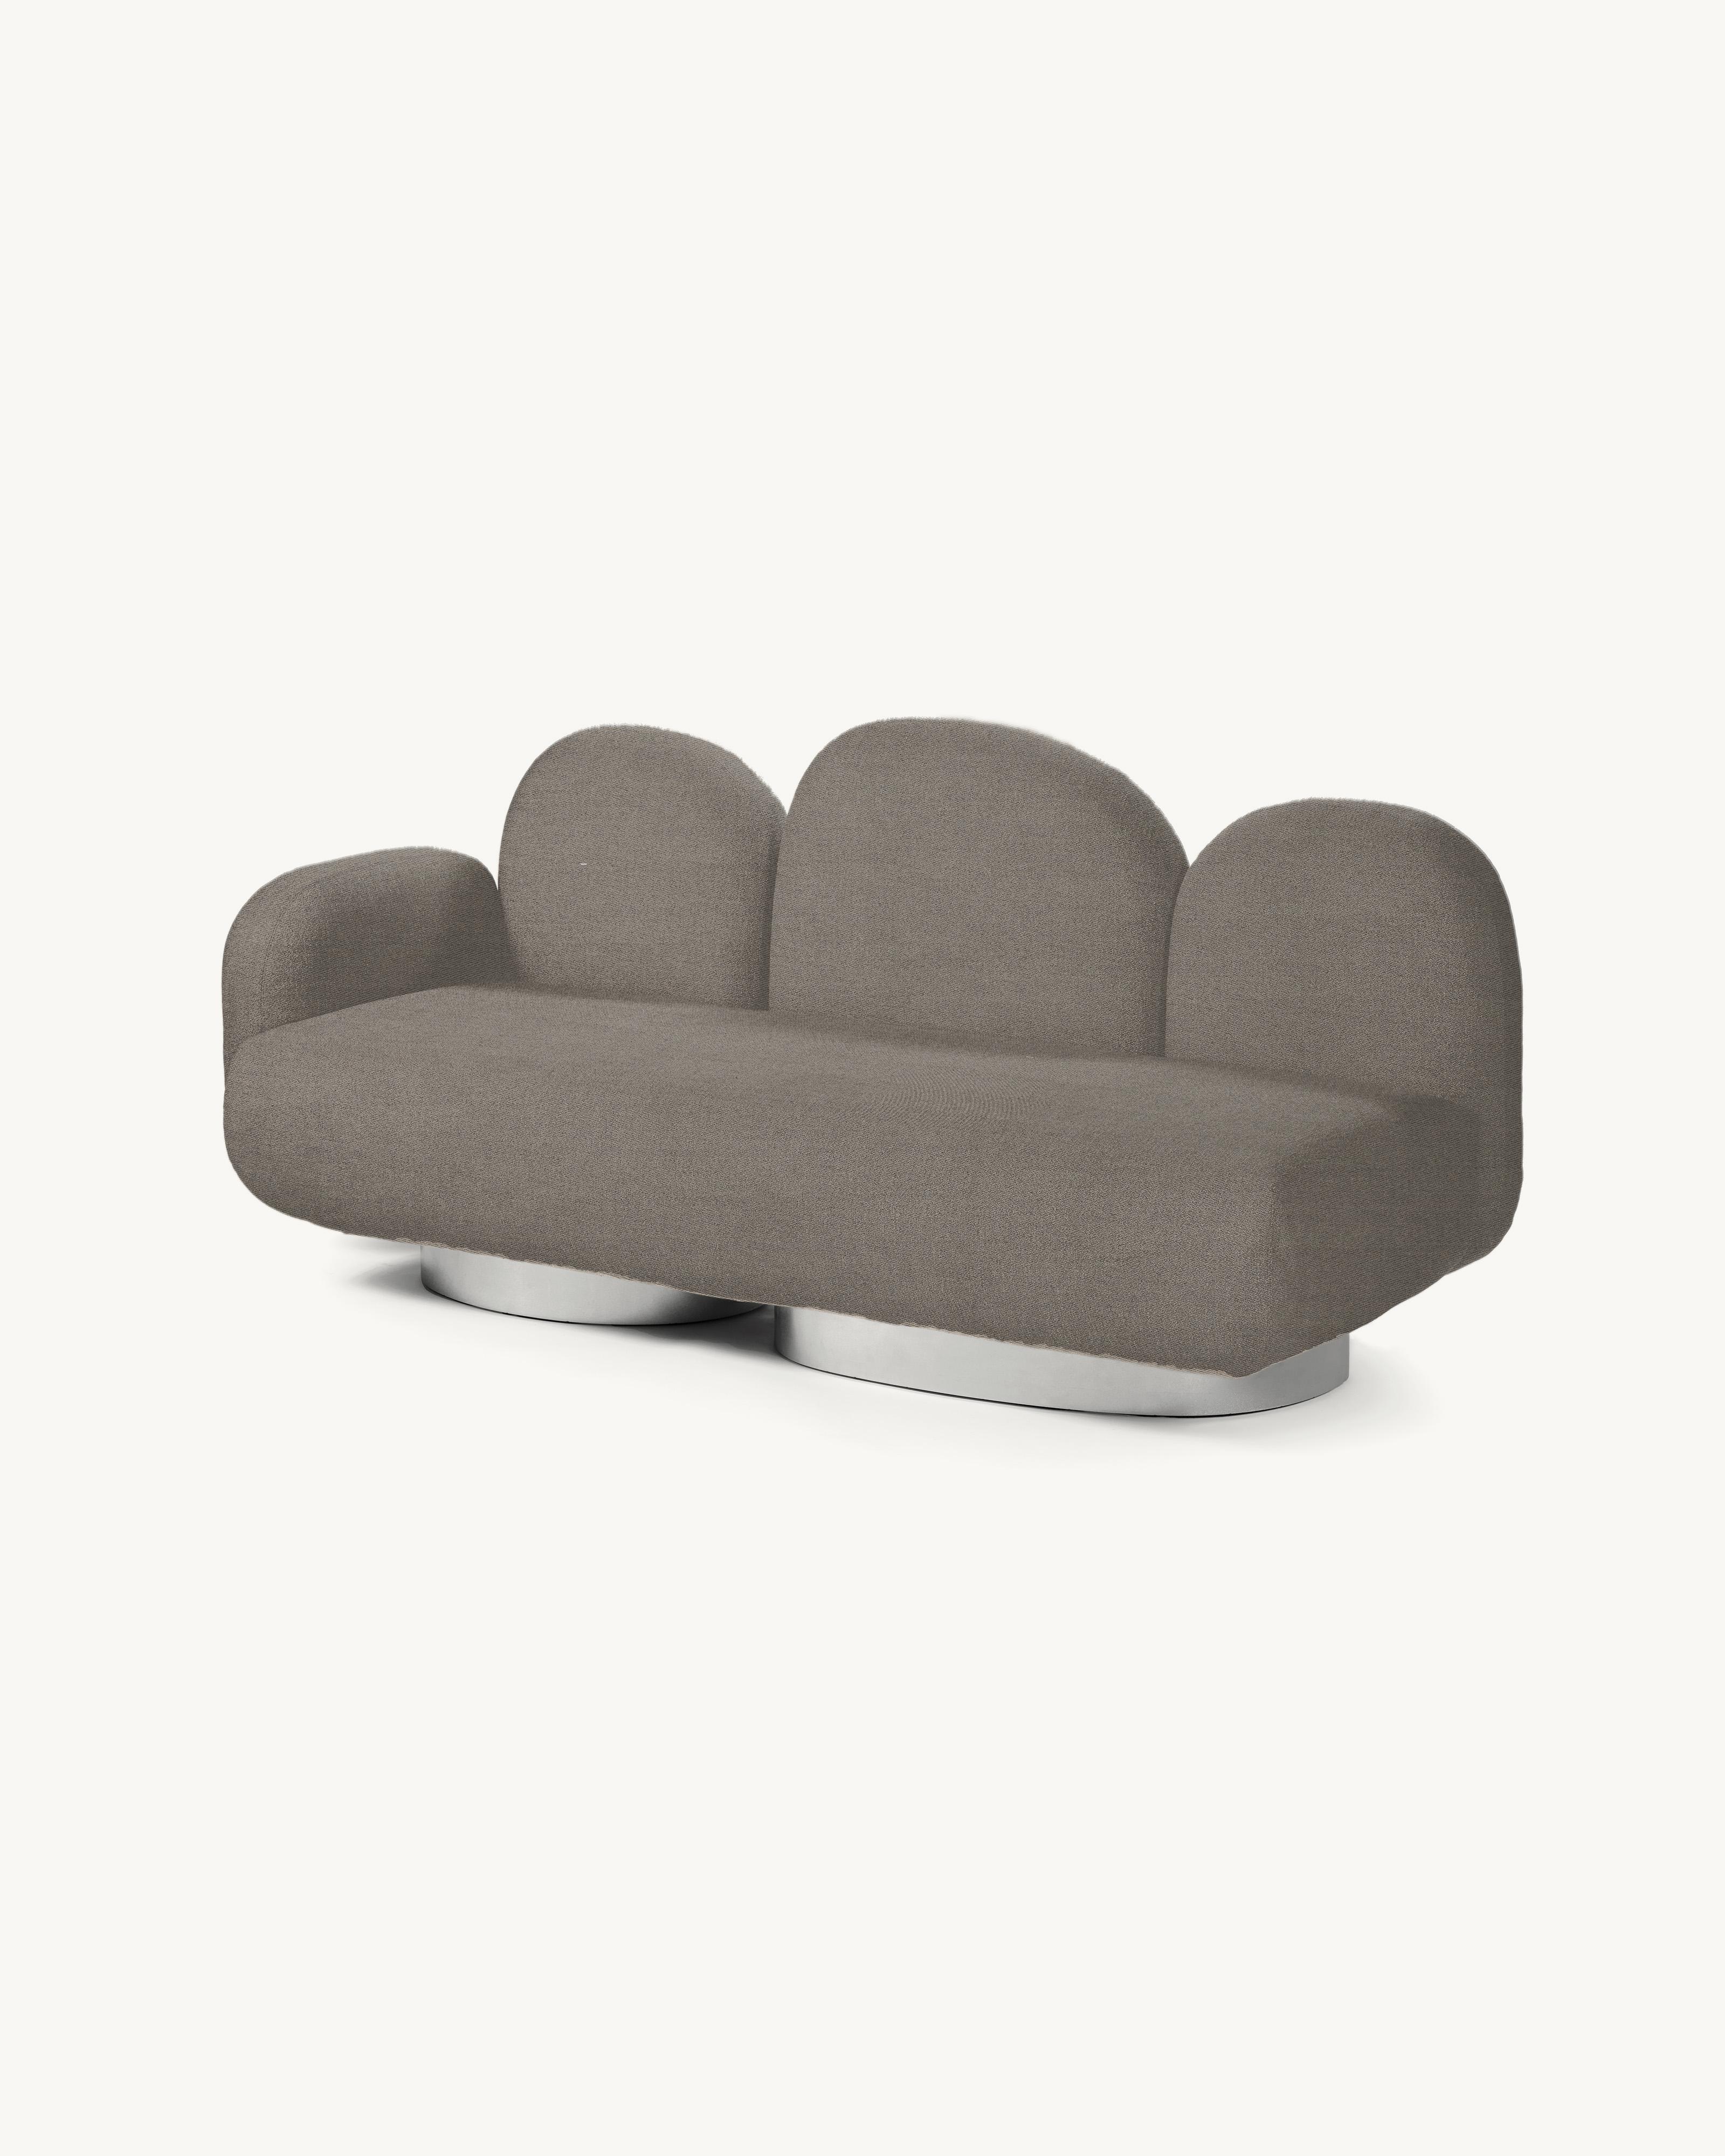 Contemporary Sofa 'Assemble' by Destroyers/Builders, 2 seaters + 1 armrest For Sale 7